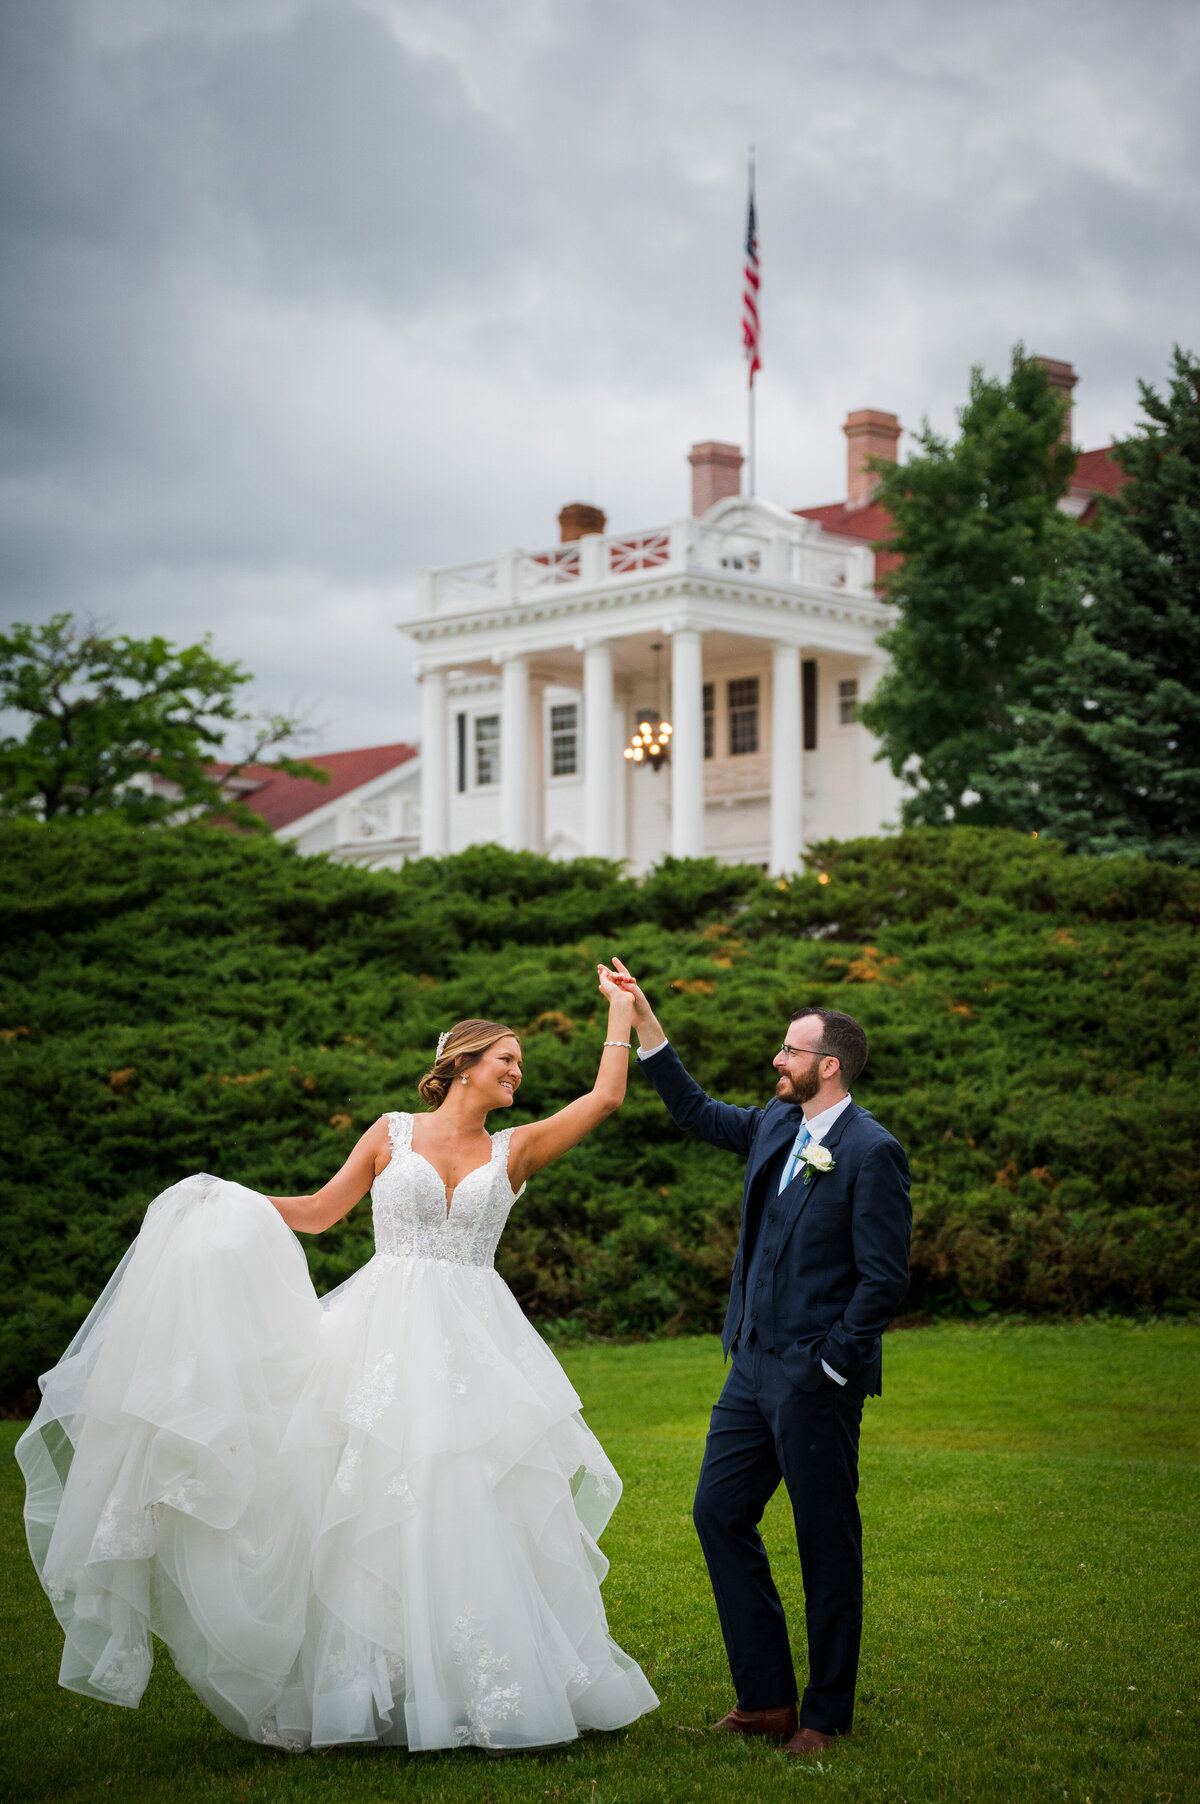 A groom spins his bride as she holds her dress with The Manor House in the background.